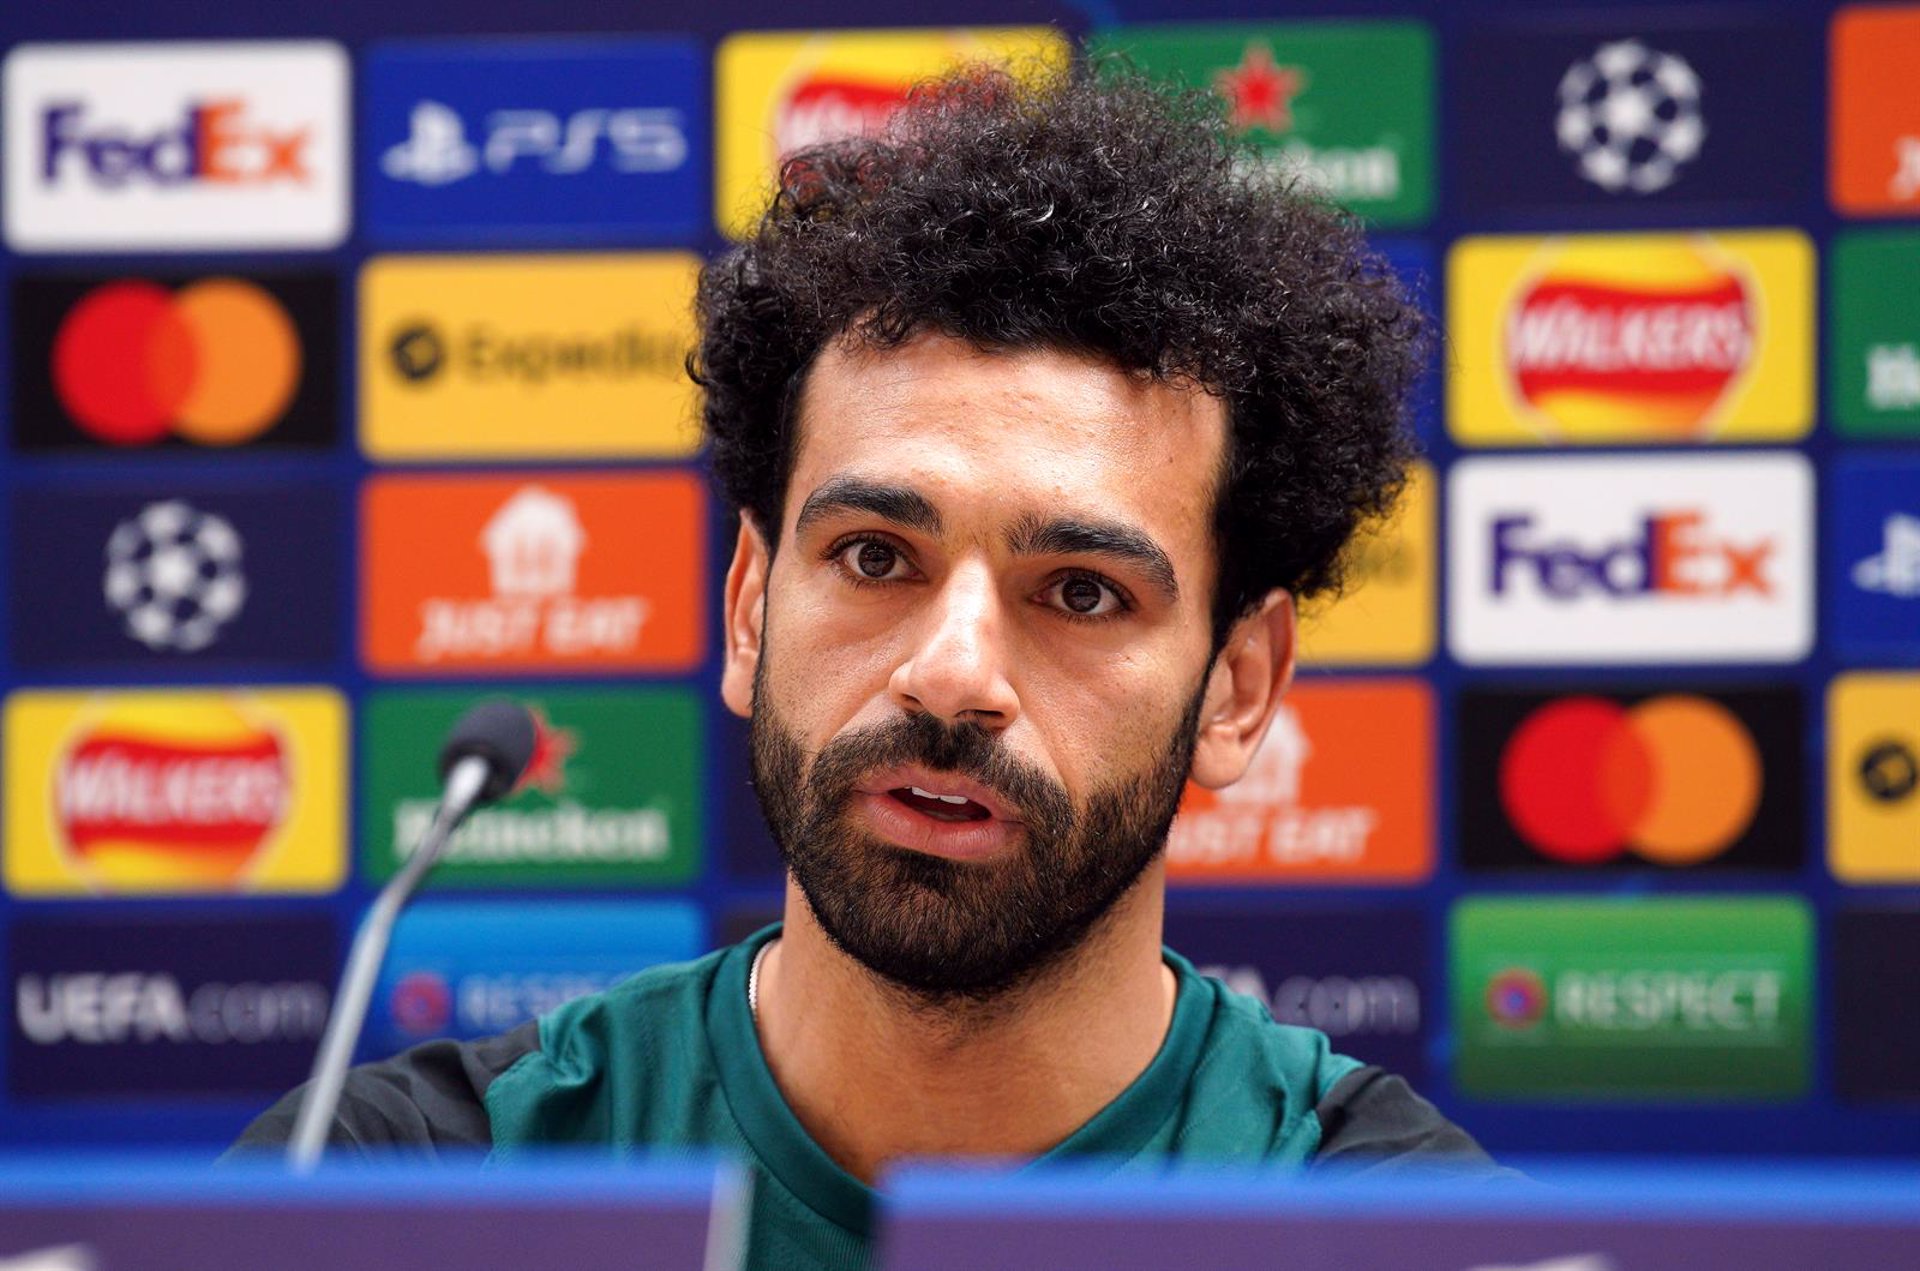 25/05/2022 25 May 2022, United Kingdom, Liverpool: Liverpool's Mohamed Salah attends a press conference for the team at the AXA Training Centre, ahead of Saturday's UEFA Champions League Final match against Real Madrid. Photo: Peter Byrne/PA Wire/dpa
DEPORTES
Peter Byrne/PA Wire/dpa | Foto: Europa Press